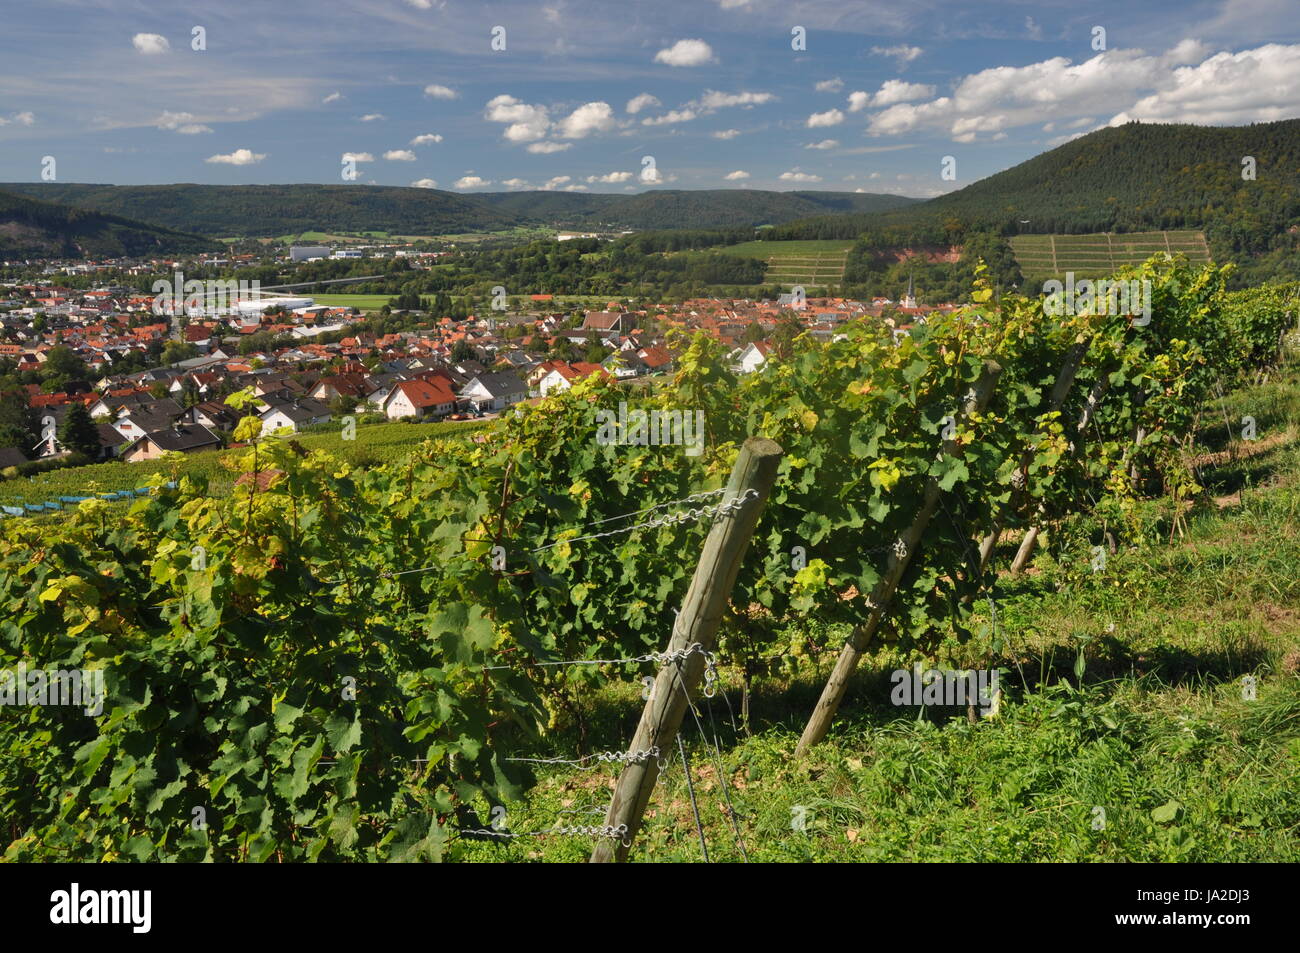 cultivation of wine, vineyard, francs, church, city, town, bavaria, germany, Stock Photo